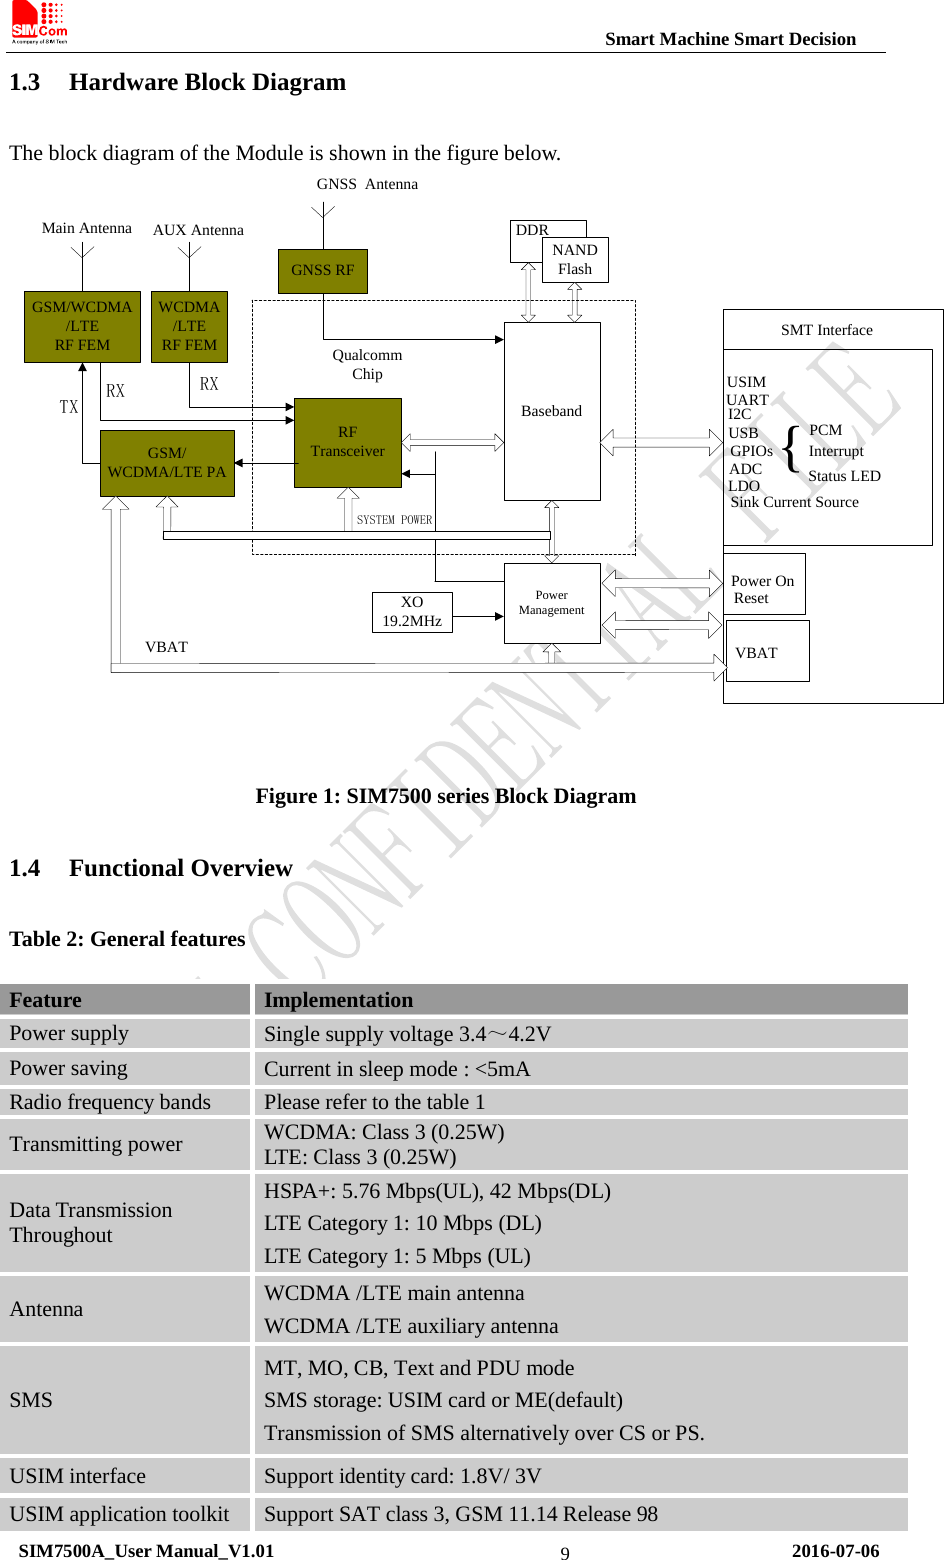                                                          Smart Machine Smart Decision 1.3 Hardware Block Diagram The block diagram of the Module is shown in the figure below. GSM/WCDMA/LTERF FEMGSM/ WCDMA/LTE PARF TransceiverBasebandXO19.2MHzNANDFlashI2C PCMInterruptStatus LED{USBUSIMPower OnResetUARTGPIOsADCLDOVBATSink Current SourceDDRMain AntennaPowerManagementQualcomm ChipSMT InterfaceWCDMA/LTERF FEMAUX AntennaTXRX RXSYSTEM POWERVBAT GNSS RFGNSS  Antenna Figure 1: SIM7500 series Block Diagram 1.4 Functional Overview Table 2: General features Feature Implementation Power supply Single supply voltage 3.4～4.2V Power saving Current in sleep mode : &lt;5mA Radio frequency bands Please refer to the table 1 Transmitting power WCDMA: Class 3 (0.25W) LTE: Class 3 (0.25W)   Data Transmission Throughout HSPA+: 5.76 Mbps(UL), 42 Mbps(DL) LTE Category 1: 10 Mbps (DL)   LTE Category 1: 5 Mbps (UL) Antenna  WCDMA /LTE main antenna WCDMA /LTE auxiliary antenna SMS MT, MO, CB, Text and PDU mode SMS storage: USIM card or ME(default) Transmission of SMS alternatively over CS or PS. USIM interface  Support identity card: 1.8V/ 3V USIM application toolkit Support SAT class 3, GSM 11.14 Release 98  SIM7500A_User Manual_V1.01                                                       2016-07-06 9 